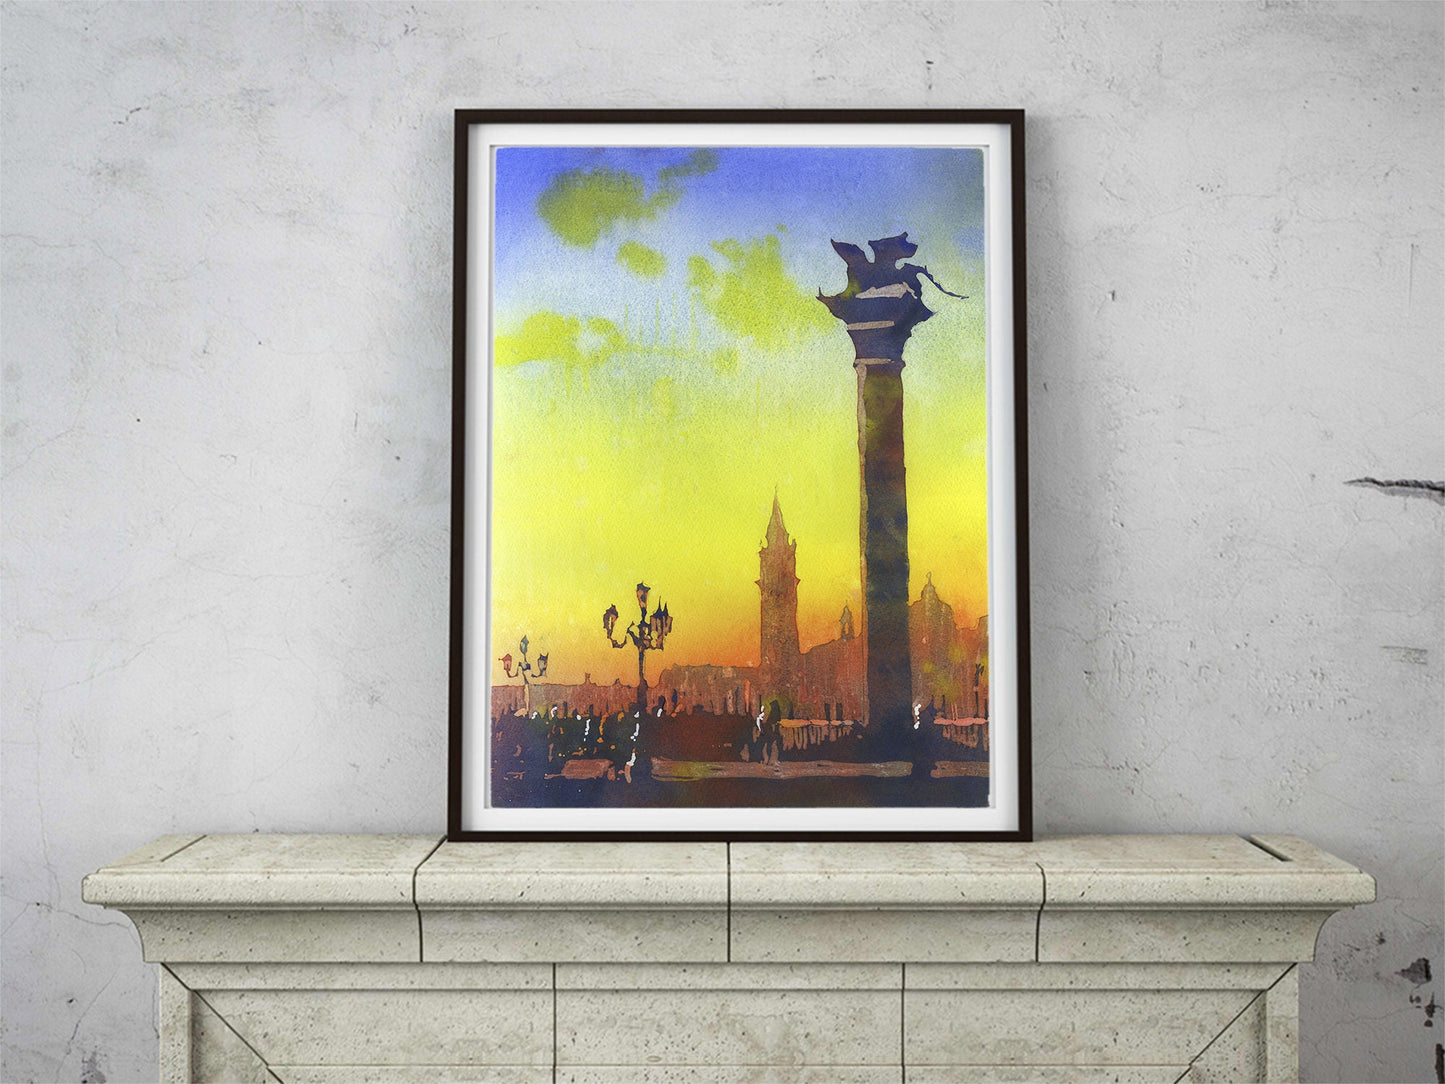 Lion of San Marco statue in Piazza di San Marco at dawn-Venice, Italy. Watercolor painting Venice skyline artwork colorful watercolor Venice (print)